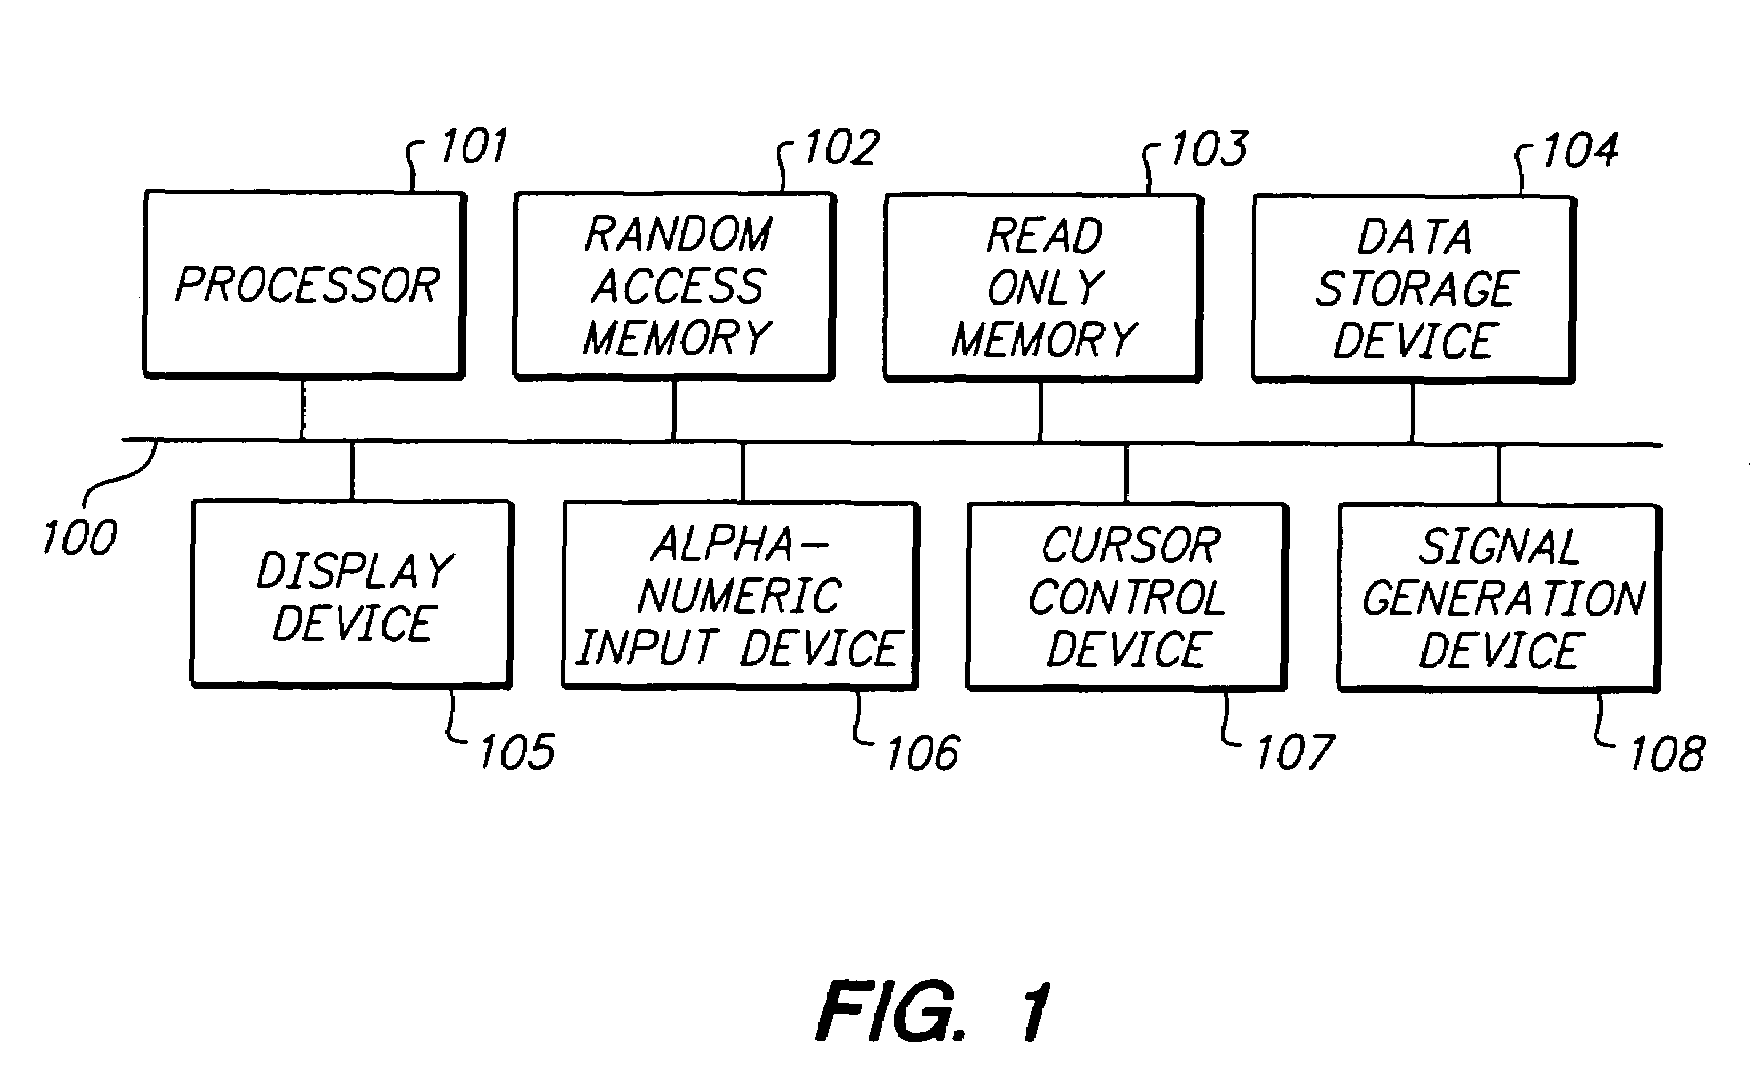 Time-based, non-constant translation of user interface objects between states